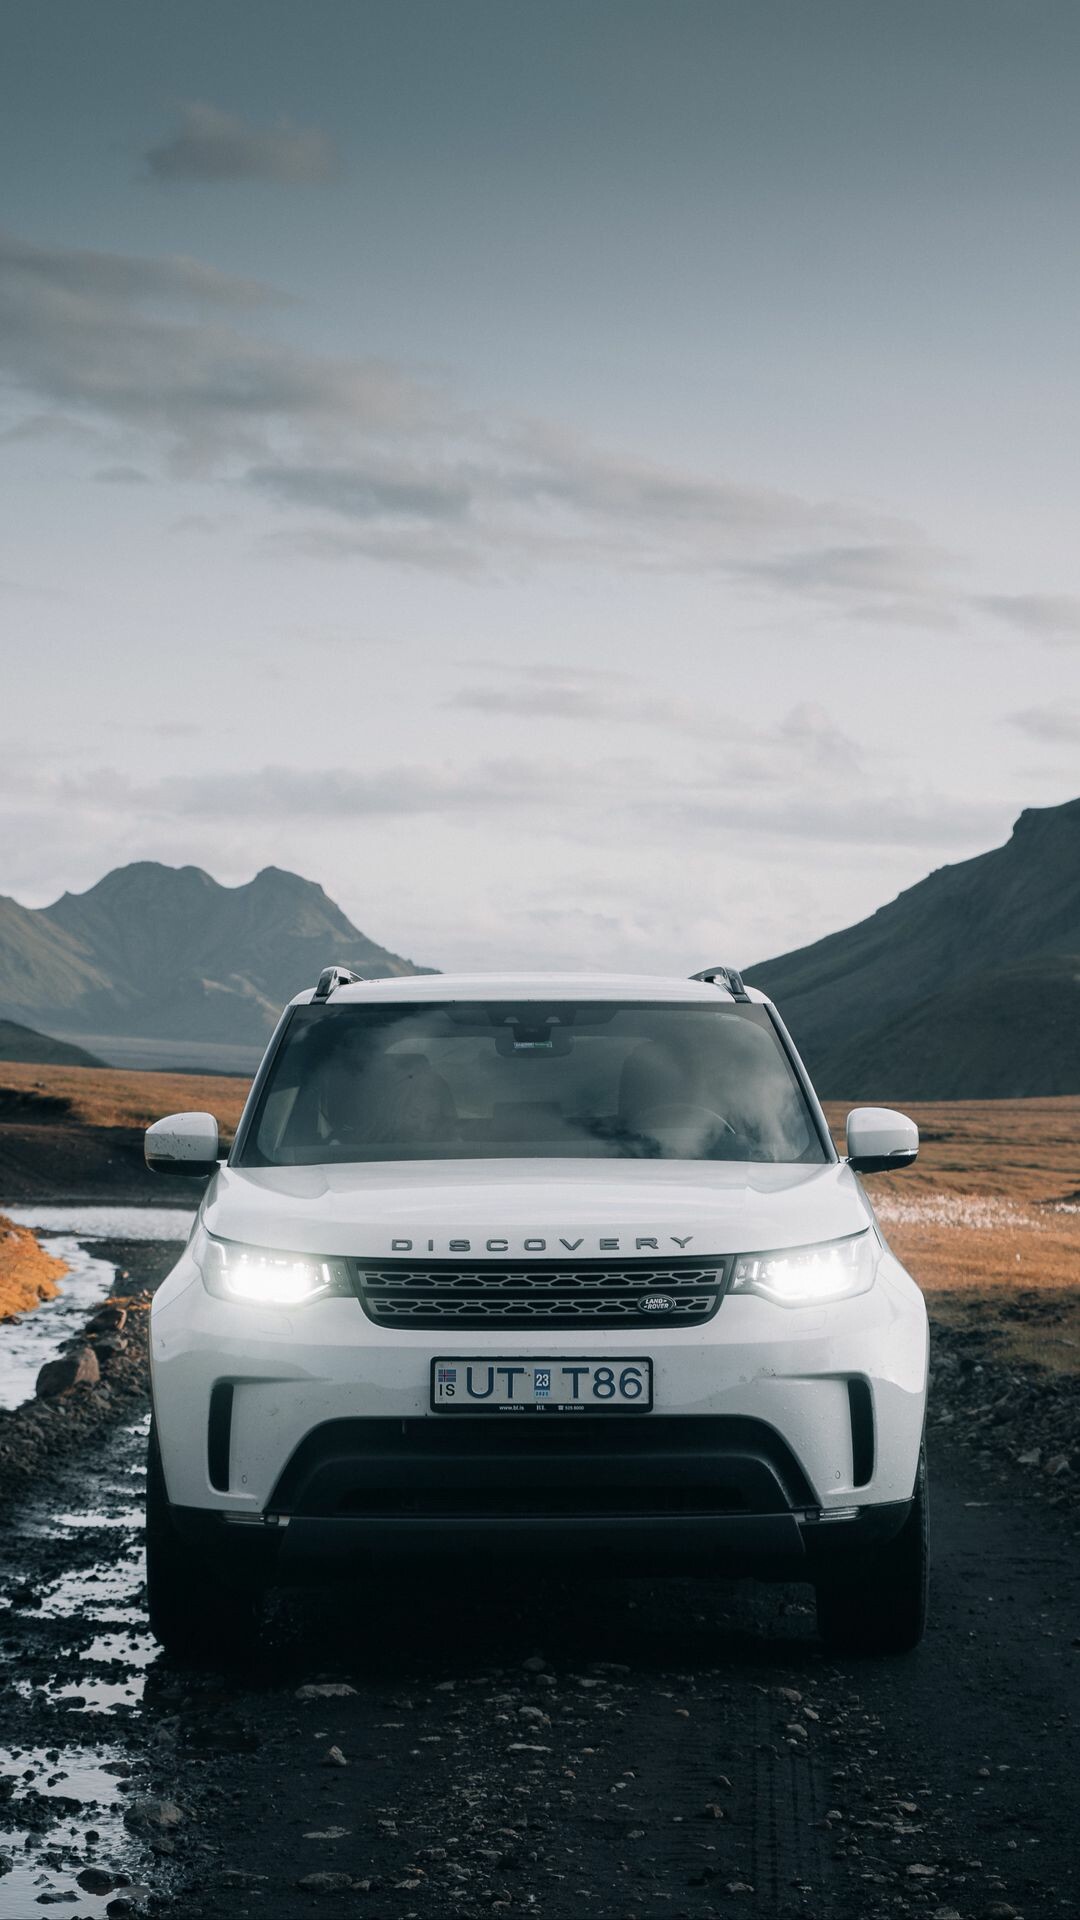 Land Rover: Discovery, The brand was created in 1948 by the Rover Company. 1080x1920 Full HD Background.